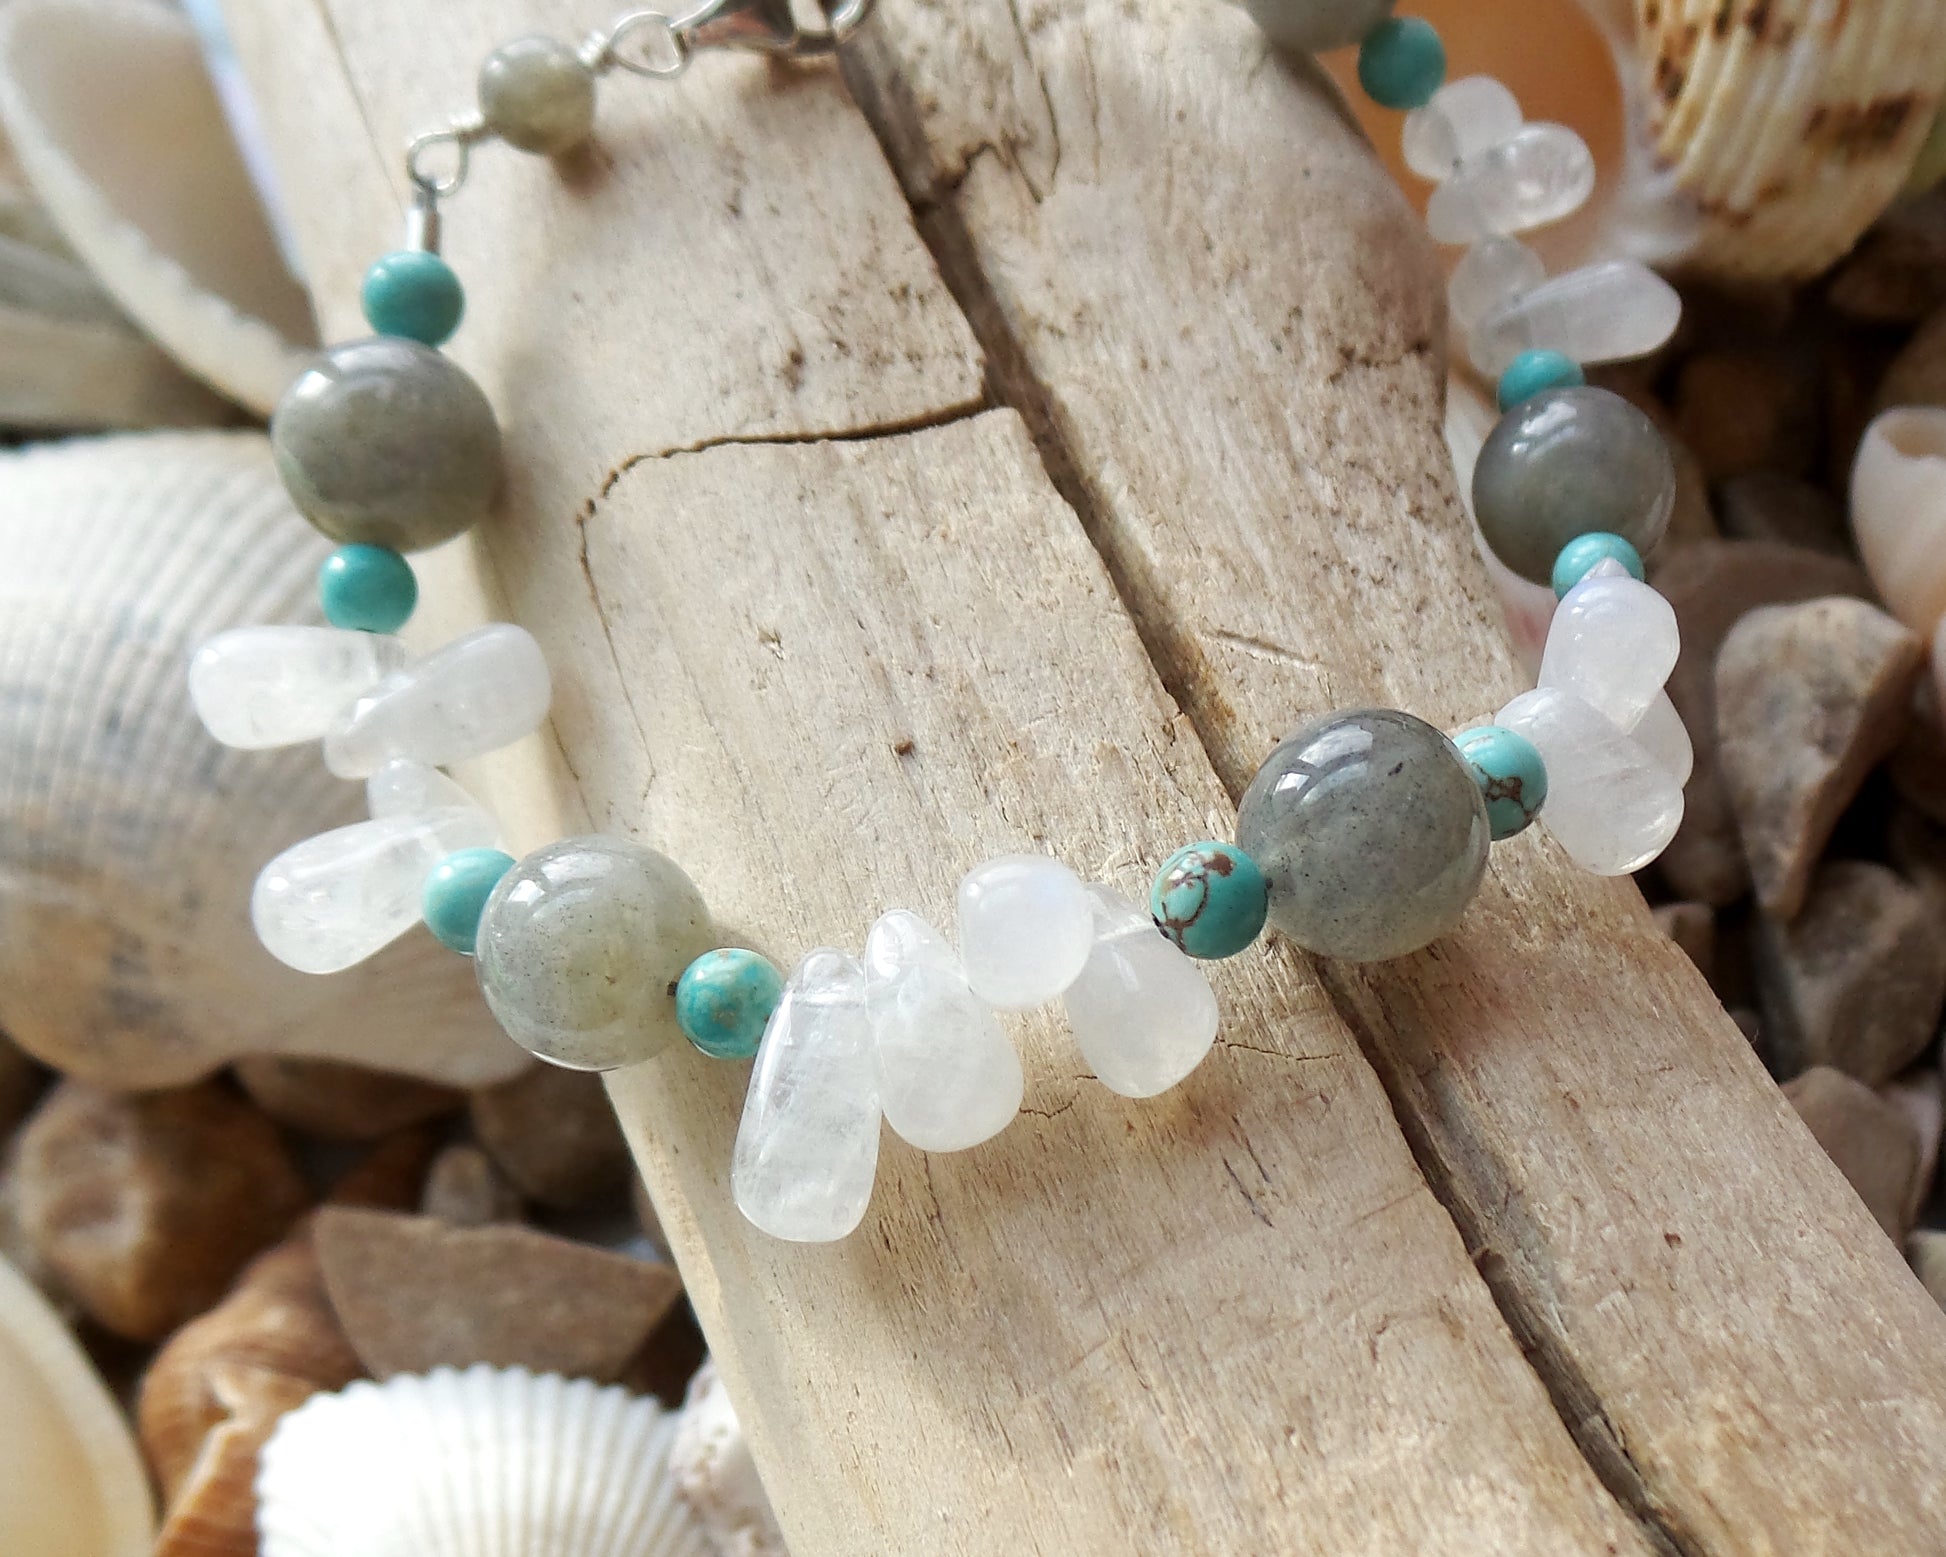 Moonstone Labradorite Turquoise Beaded Gemstone Bracelet with Sterling Silver lobster claw clasp, on Beach Wood background 